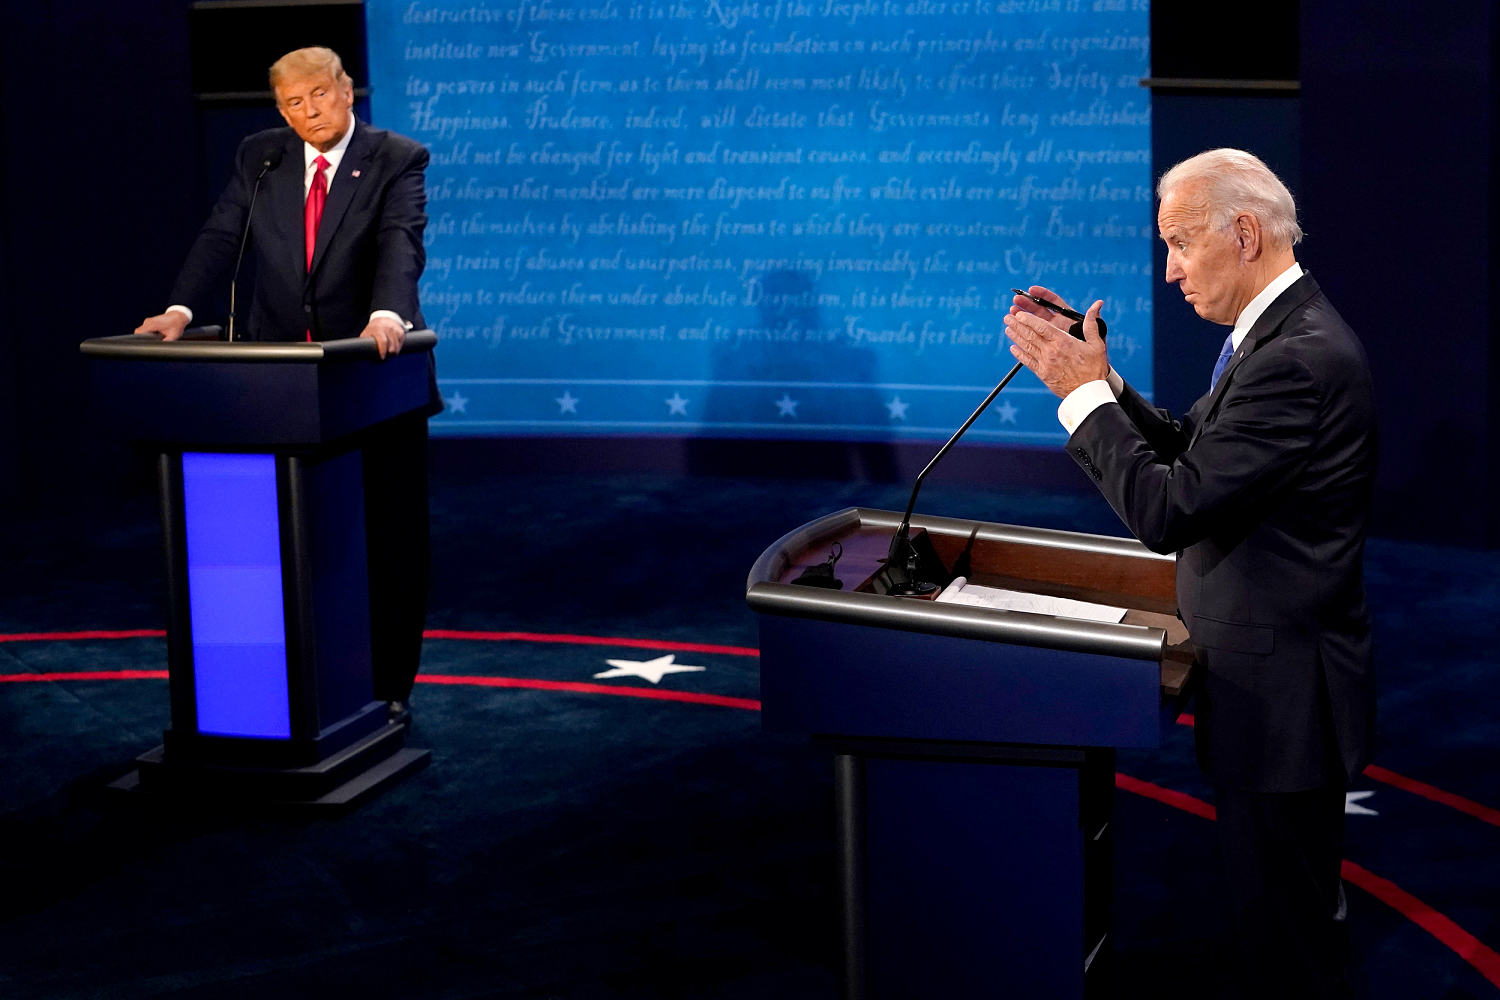 Biden's campaign proposes June and September for debates against Trump